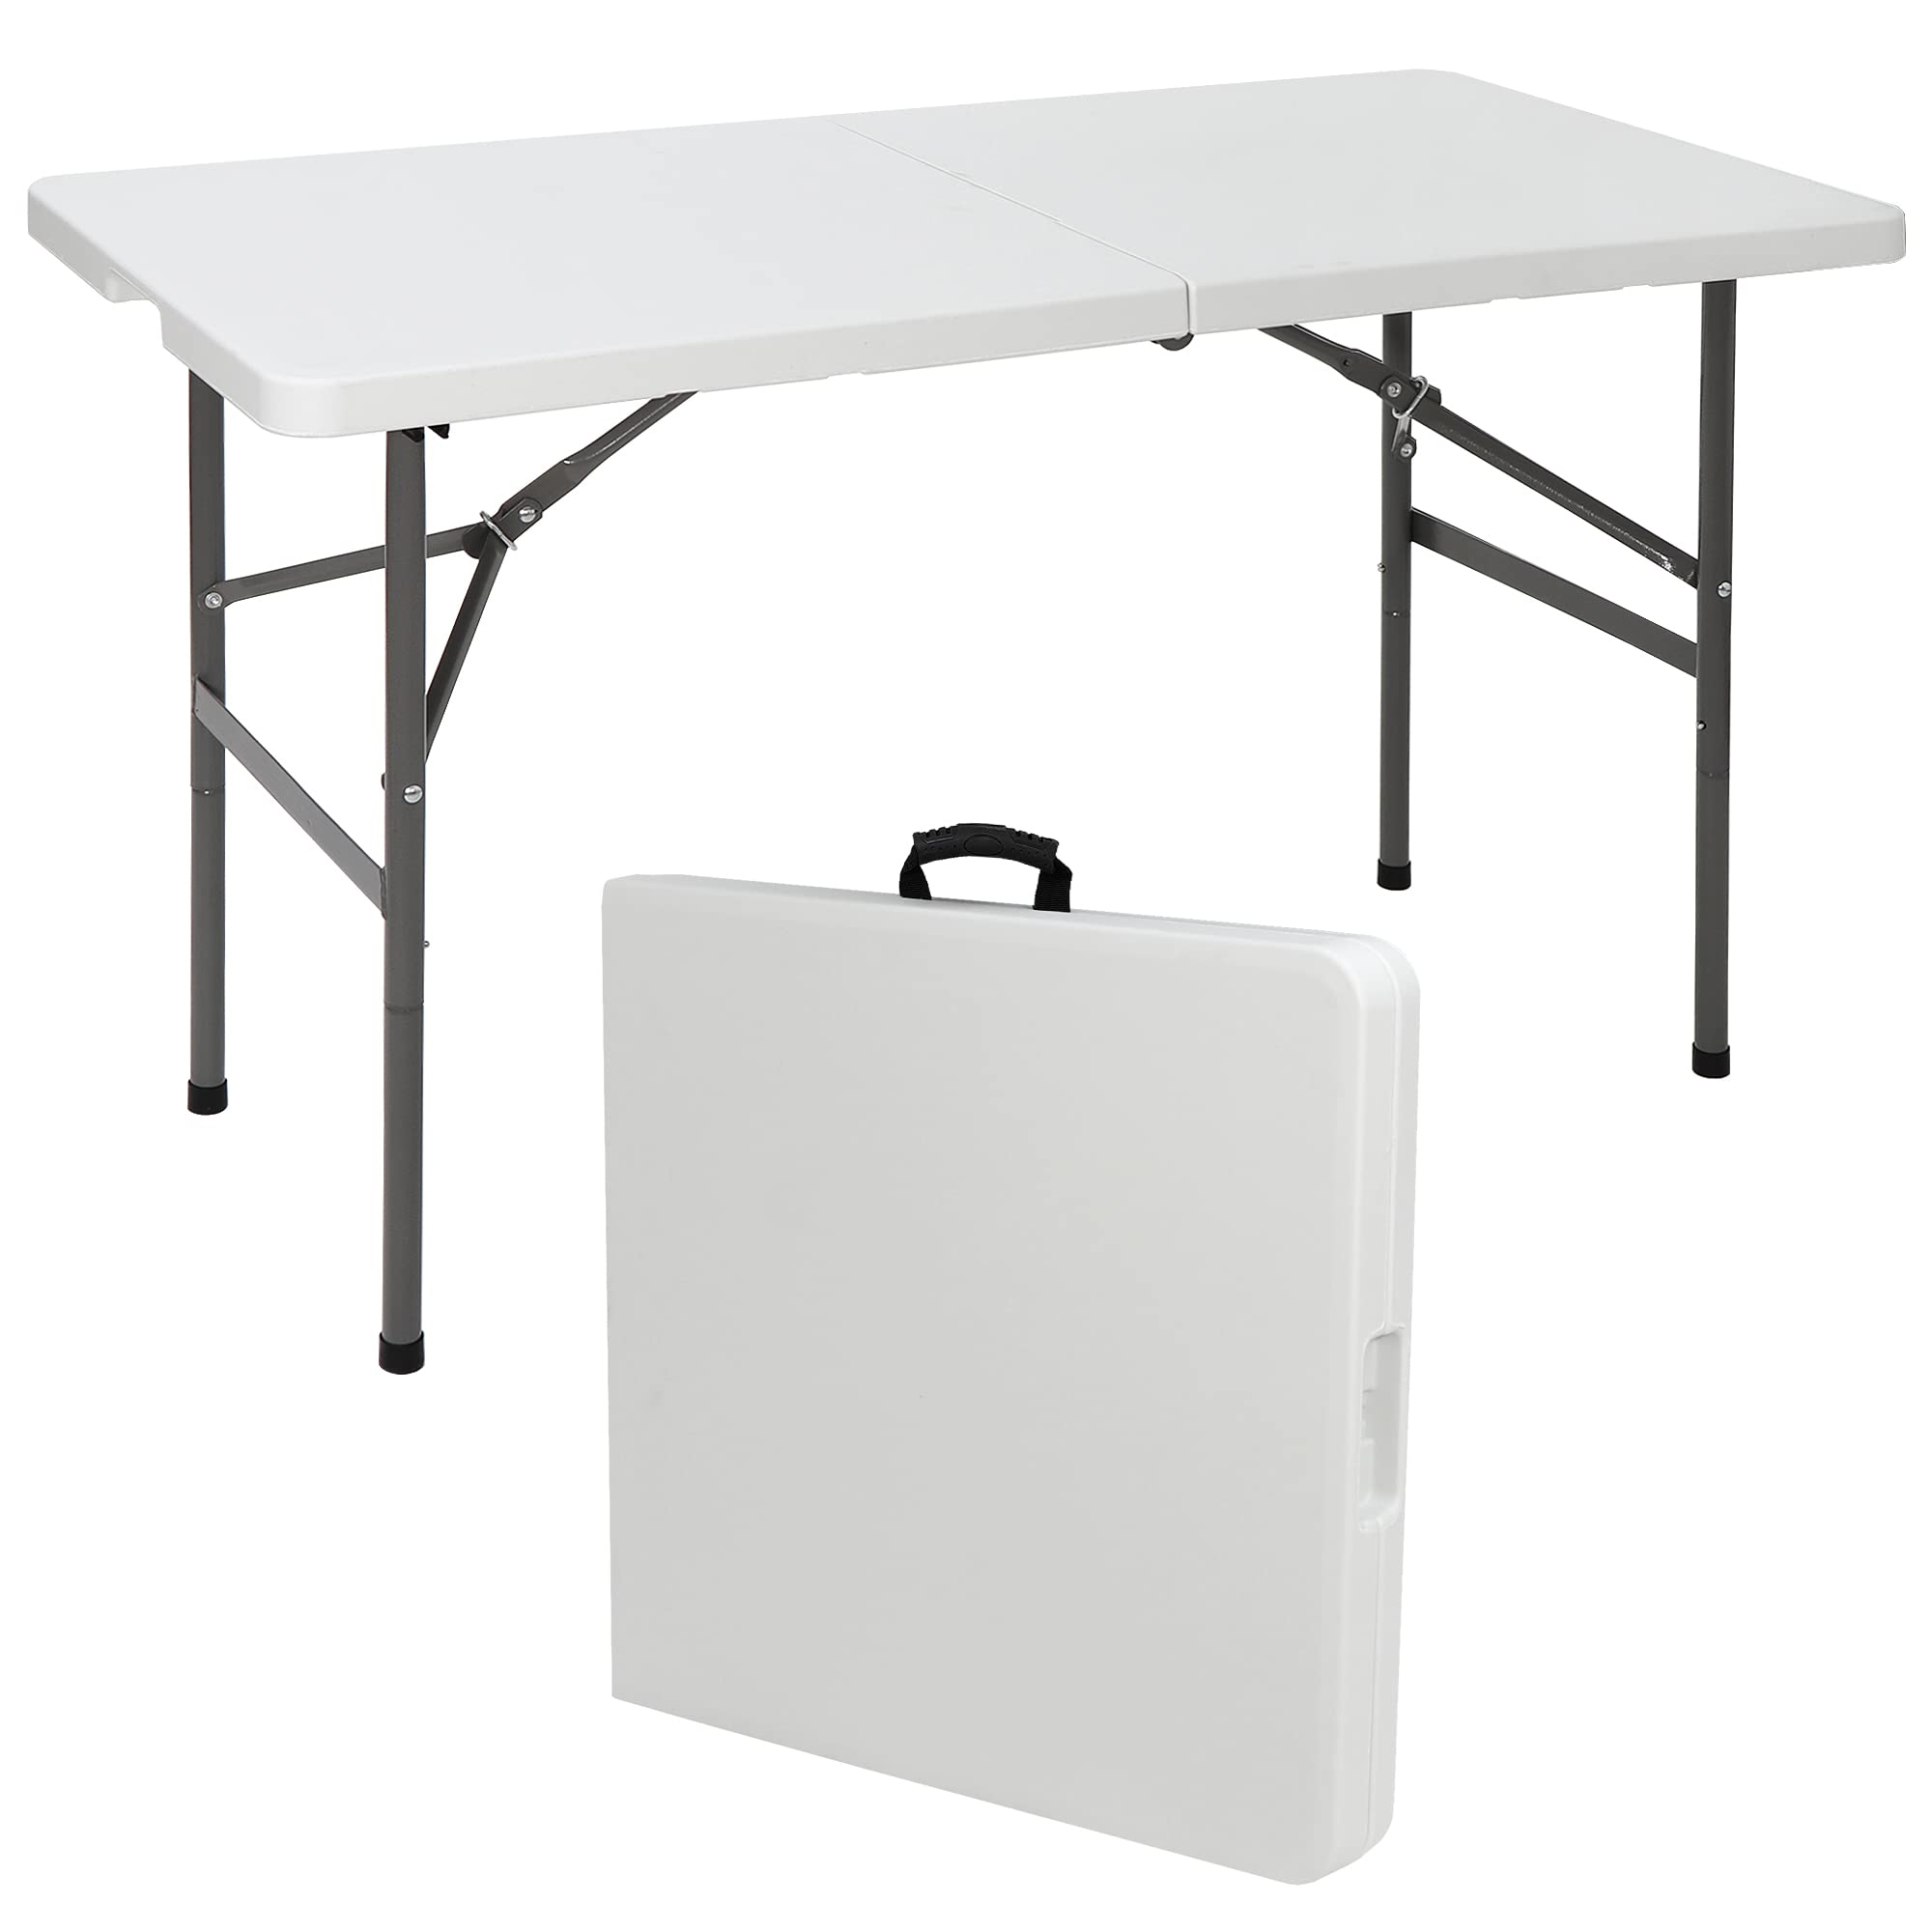 SUPER DEAL Portable 4 Foot Plastic Folding Table, Indoor Outdoor Heavy Duty Fold-in-Half Picnic Party Camping Barbecues Table wi